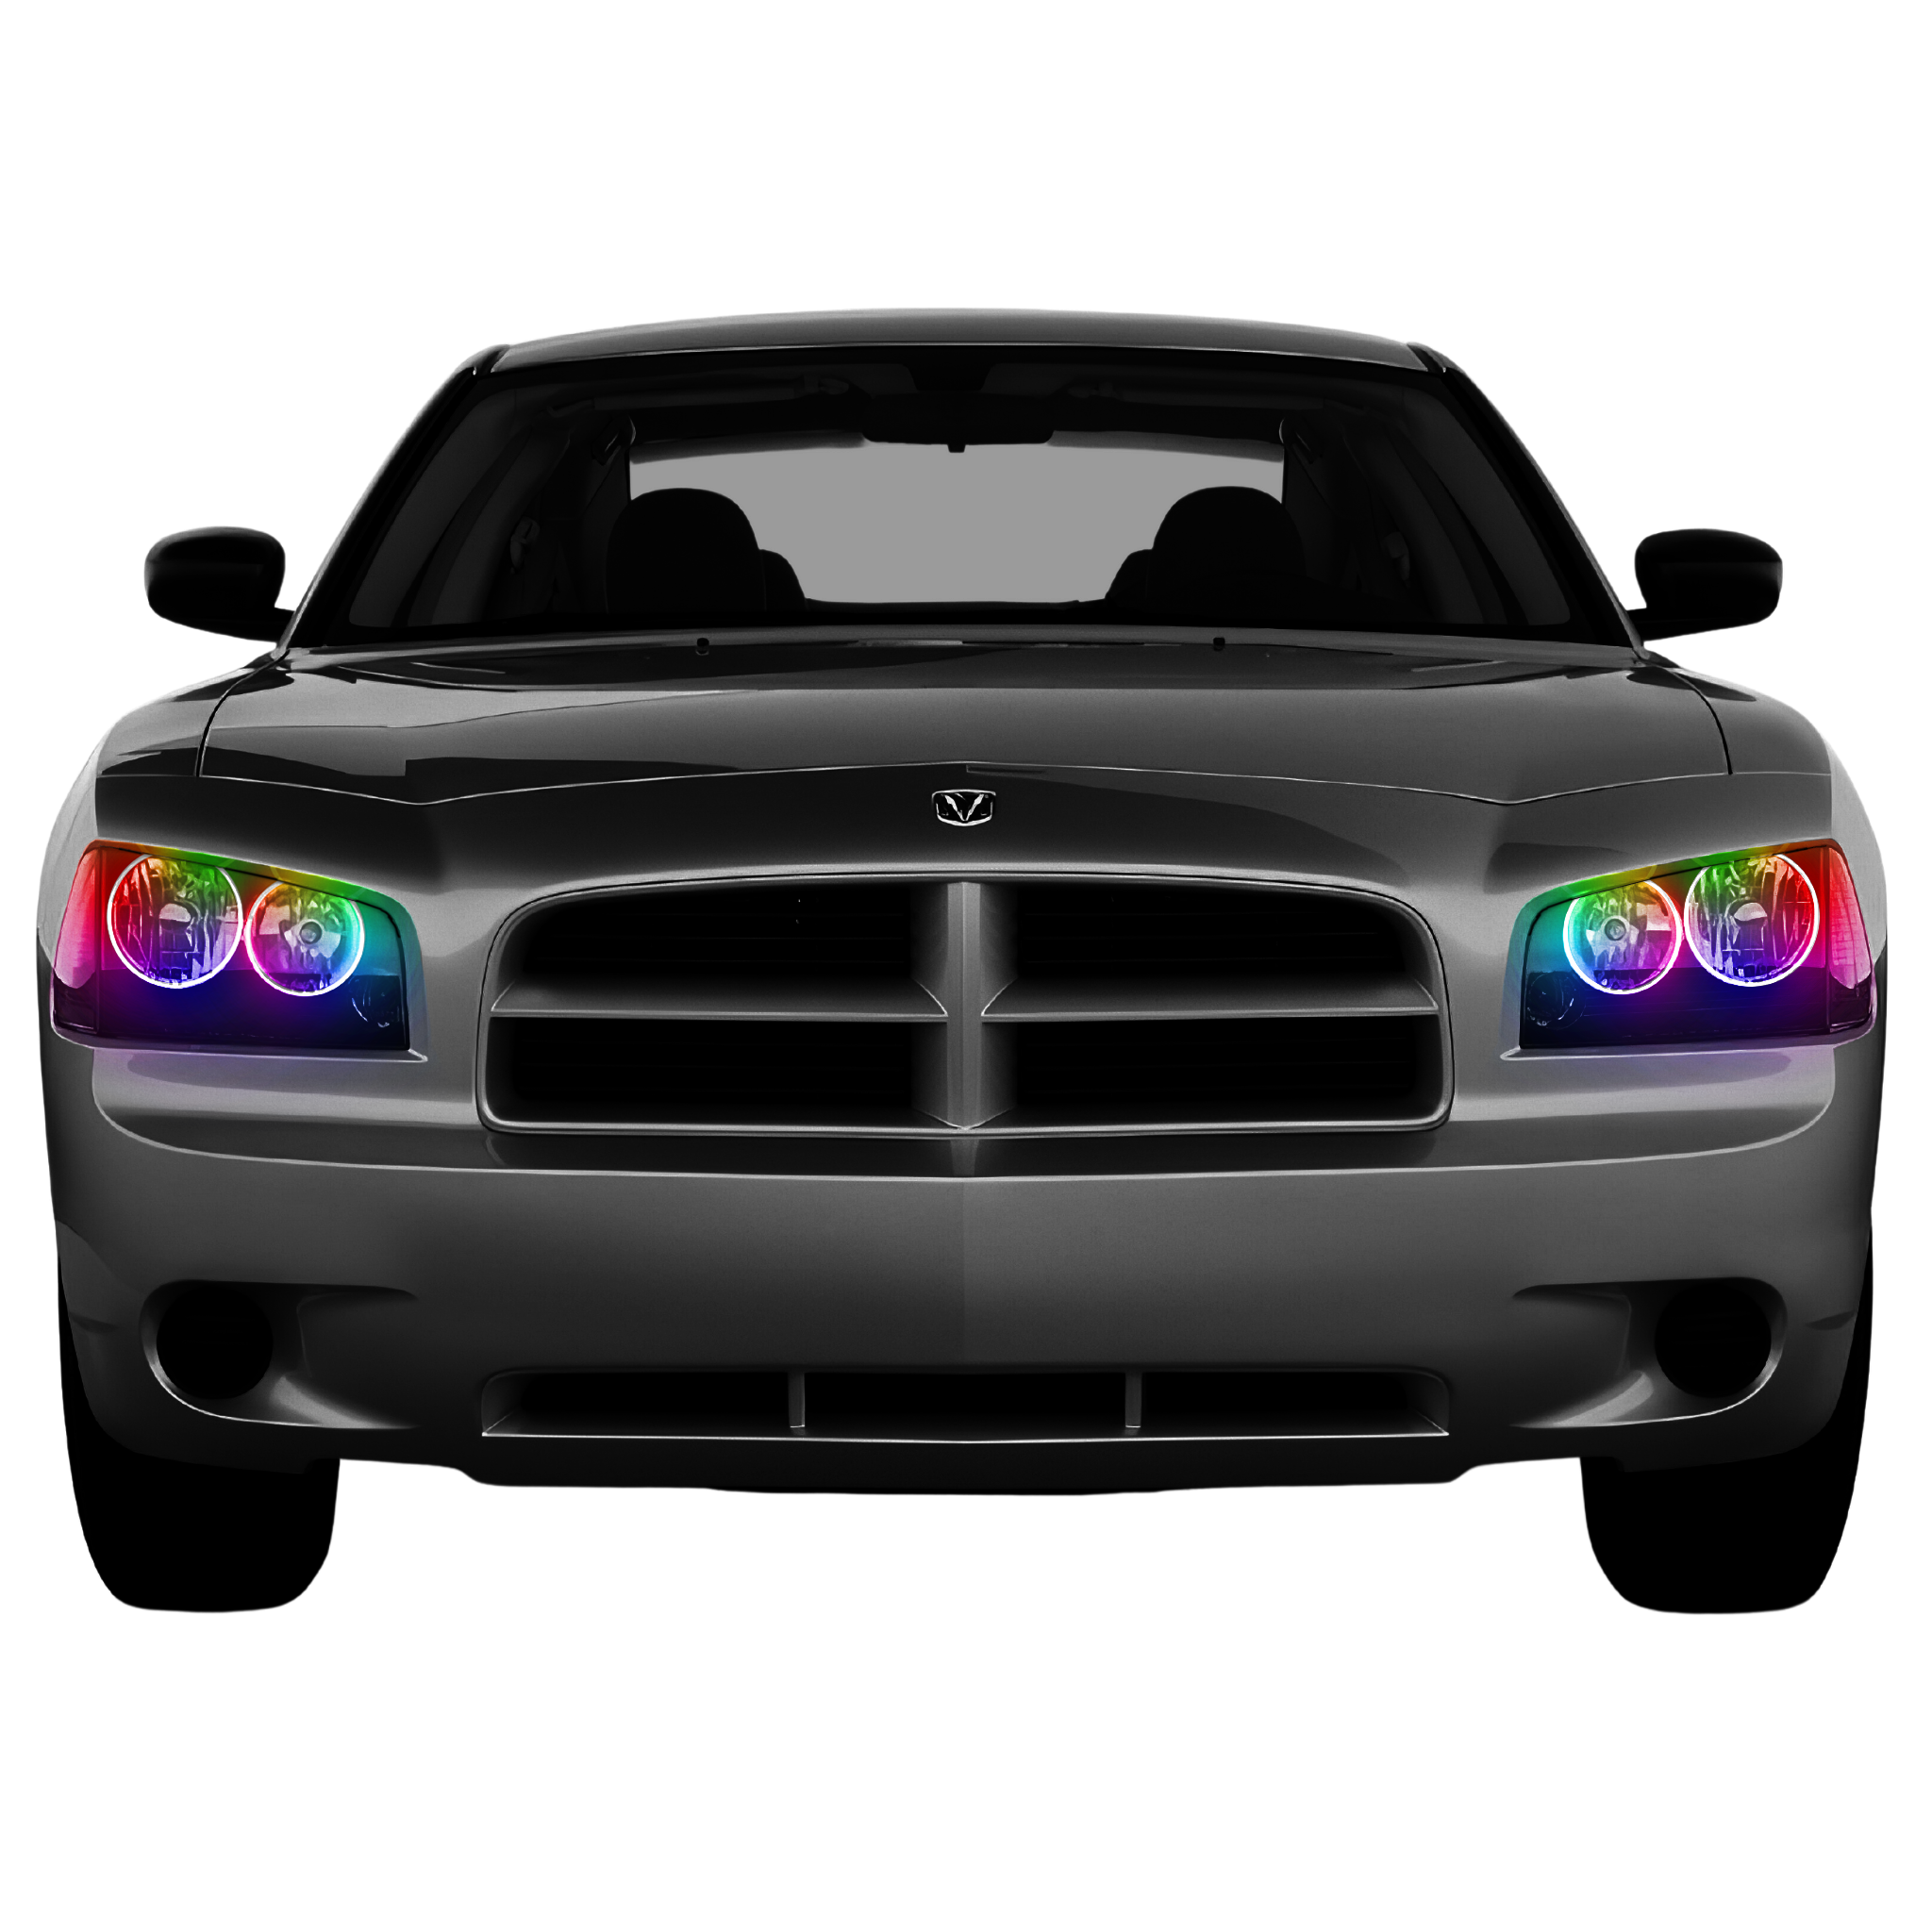 2006-2010 Dodge Charger Multicolor Halo Kit - RGB Halo Kits Multicolor Flow Series Color Chasing RGBWA LED headlight kit Oracle Lighting Trendz OneUpLighting Morimoto theretrofitsource AutoLEDTech Diode Dynamics